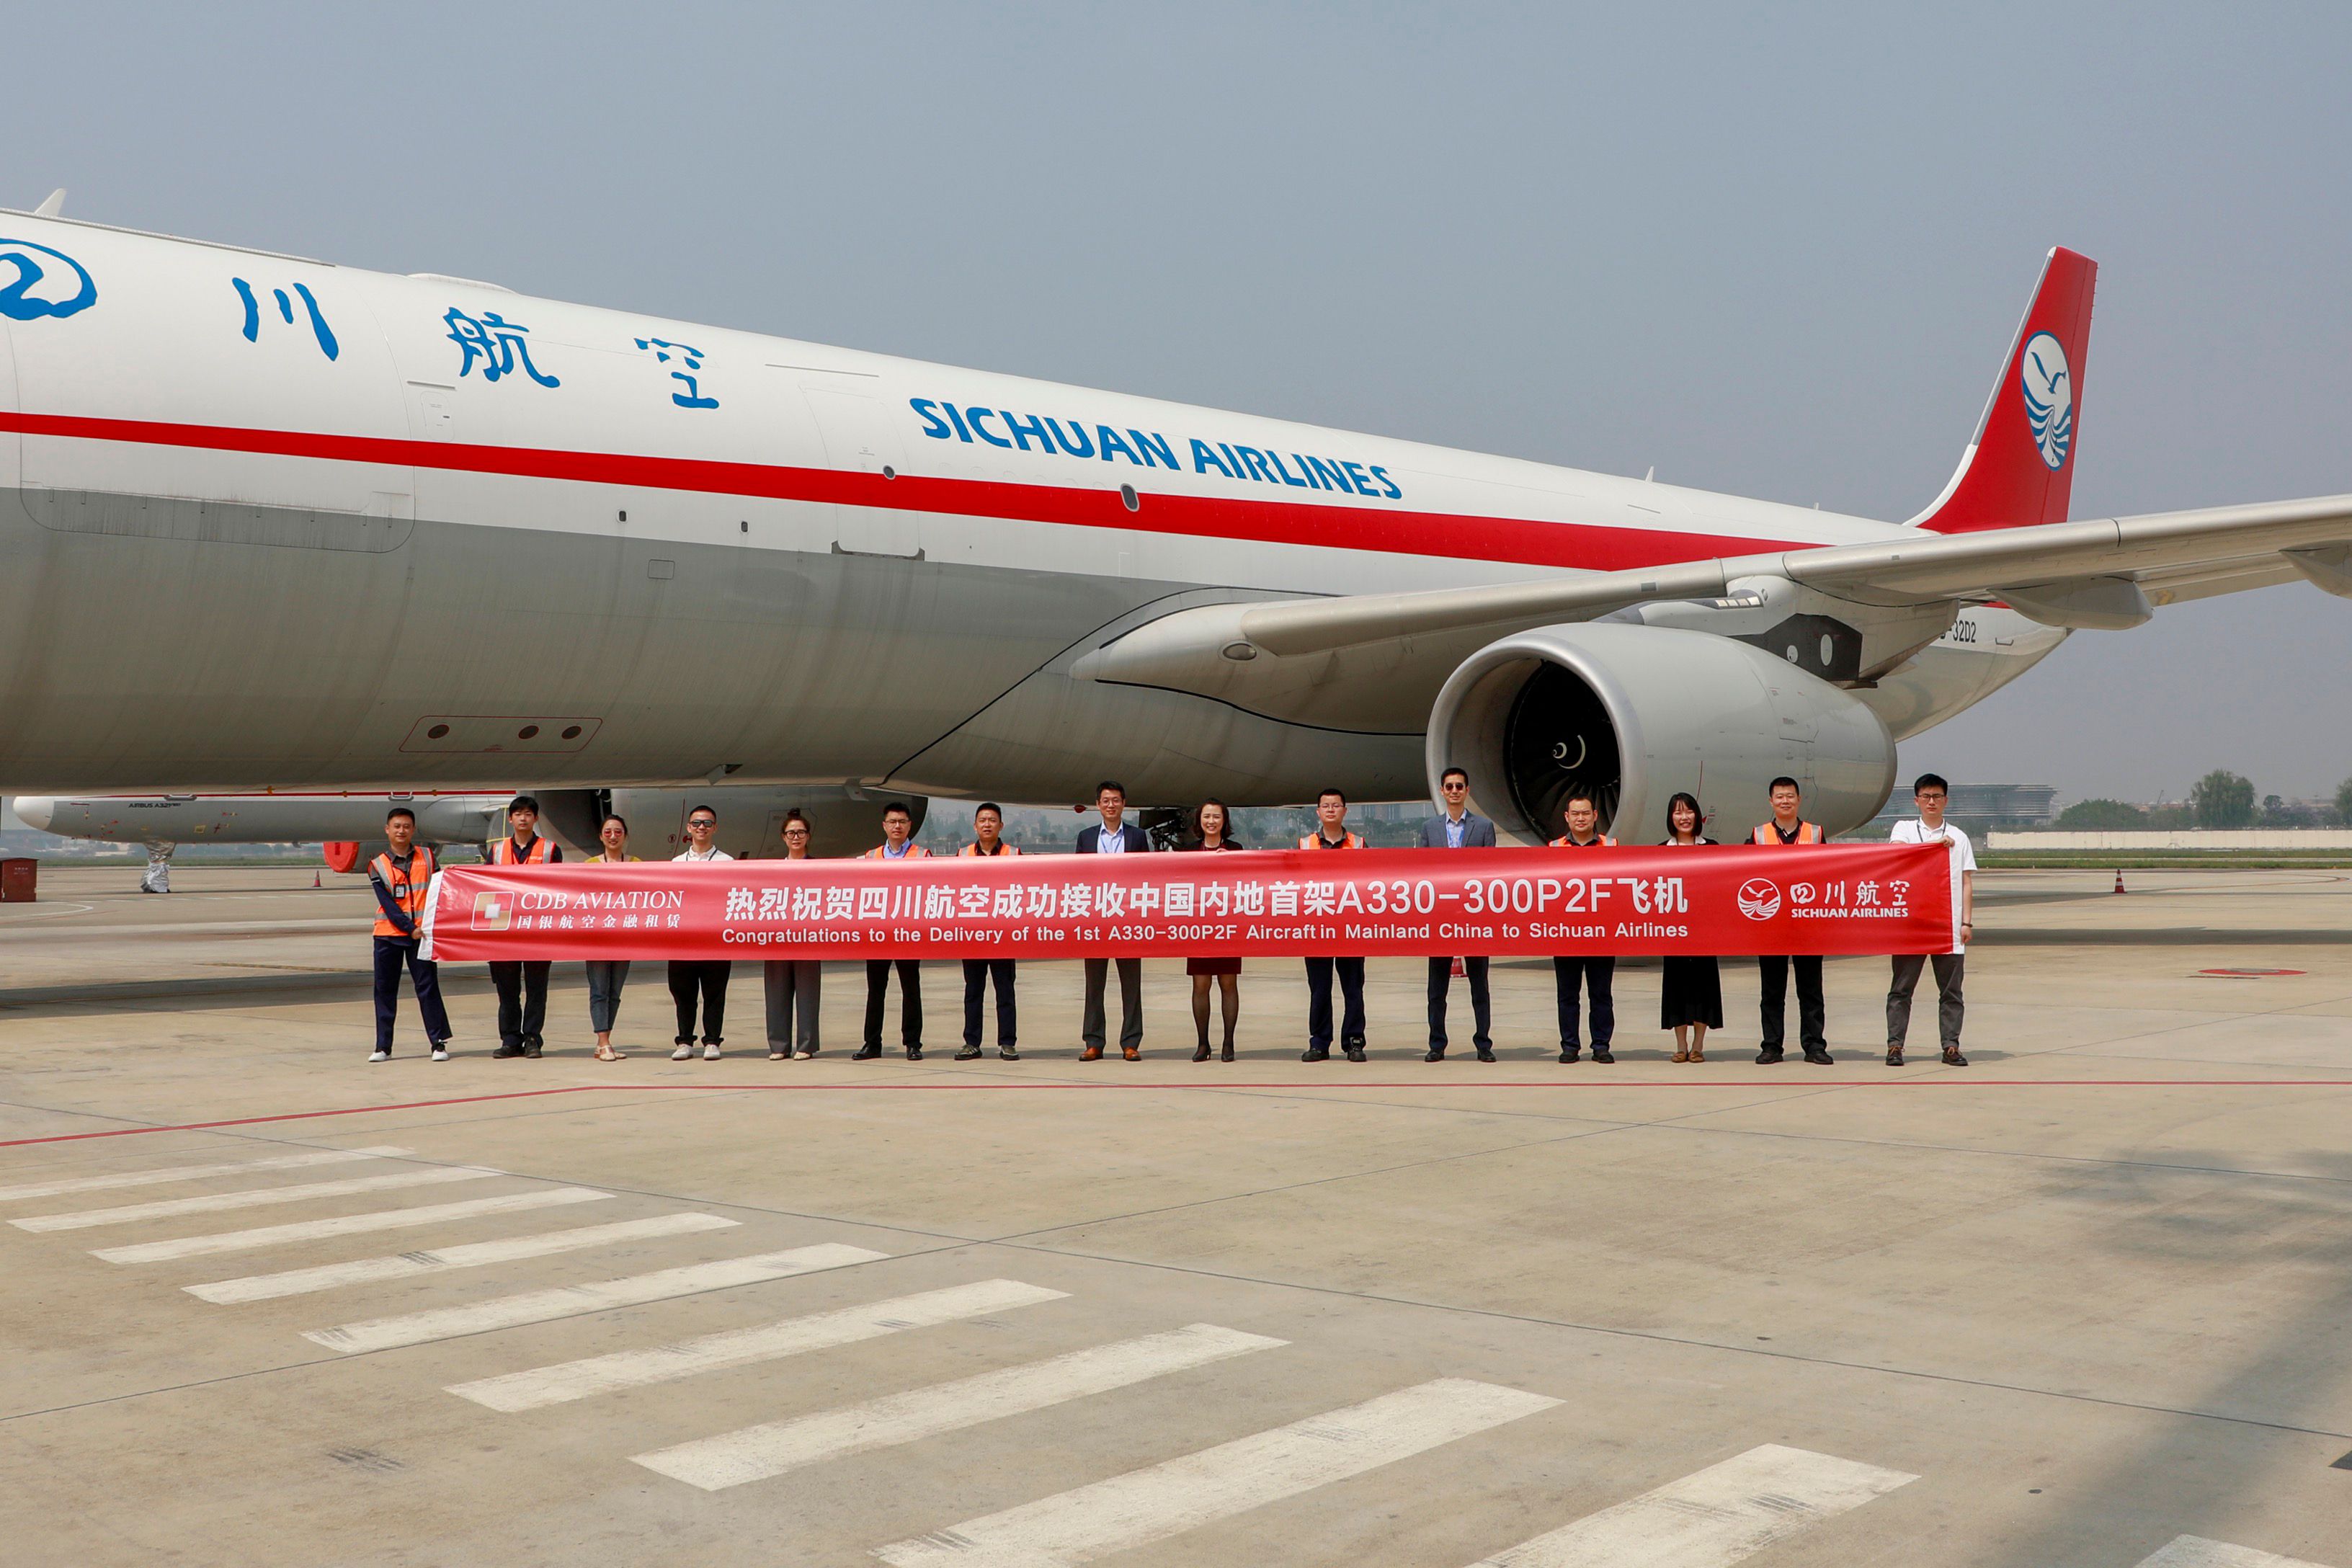 Sichuan Airlines Airbus A330 P2F freighter aircraft